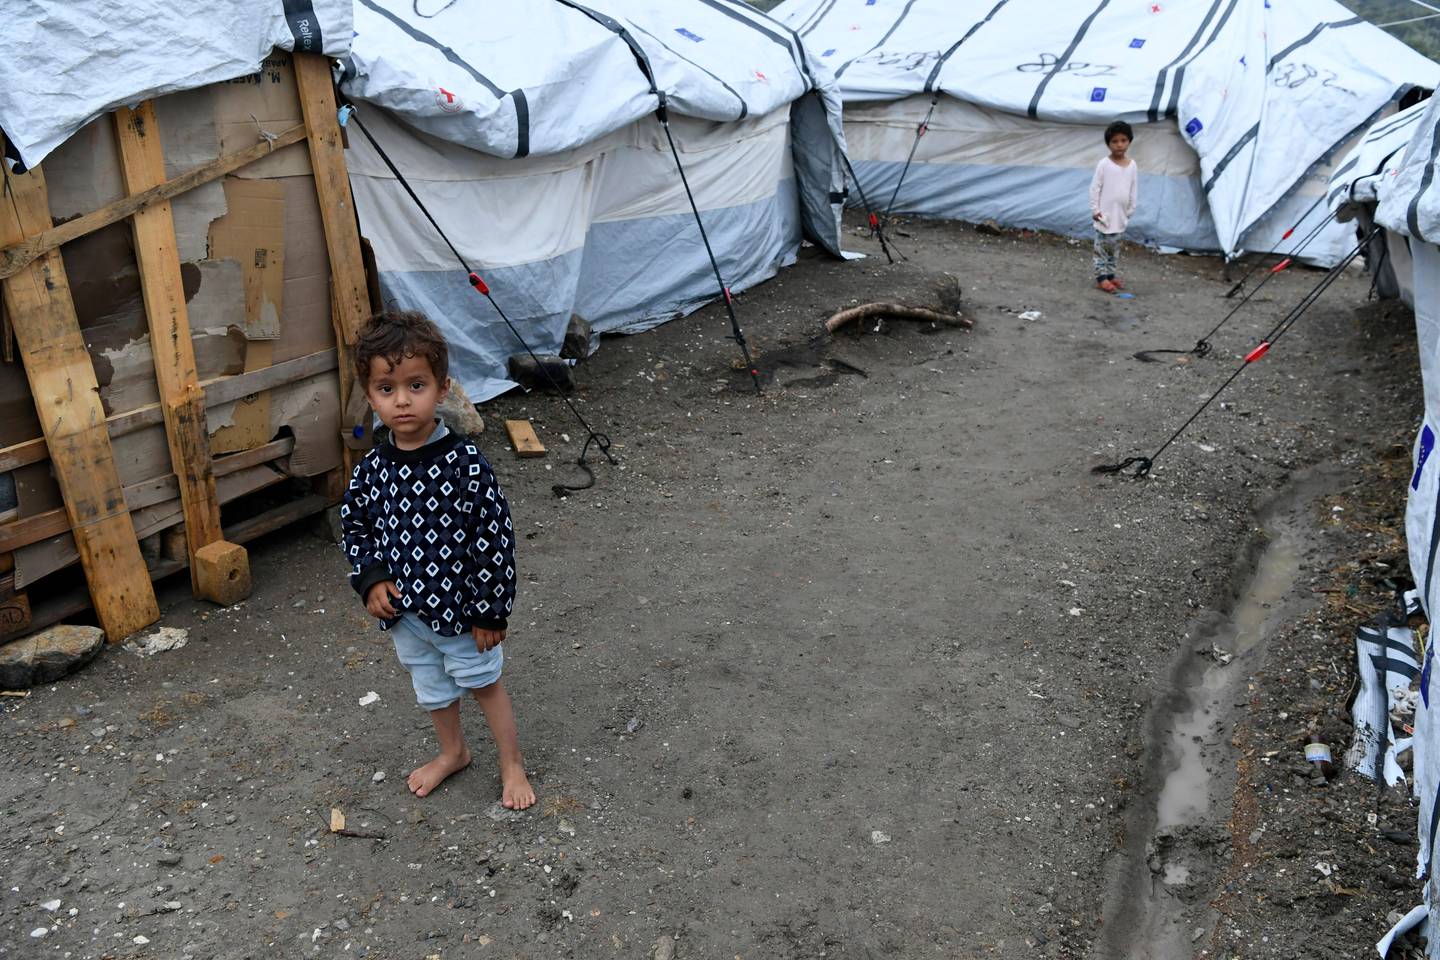 A migrant boy stands barefoot between tents after a rainstorm outside the Moria refugee camp on the northeastern Aegean island of Lesbos, Greece, Wednesday, Sept. 25, 2019. Authorities on the Greek island of Lesbos have partly reopened the country's largest refugee camp to newly arrived migrants despite acute overcrowding. (AP Photo/Michael Varaklas)